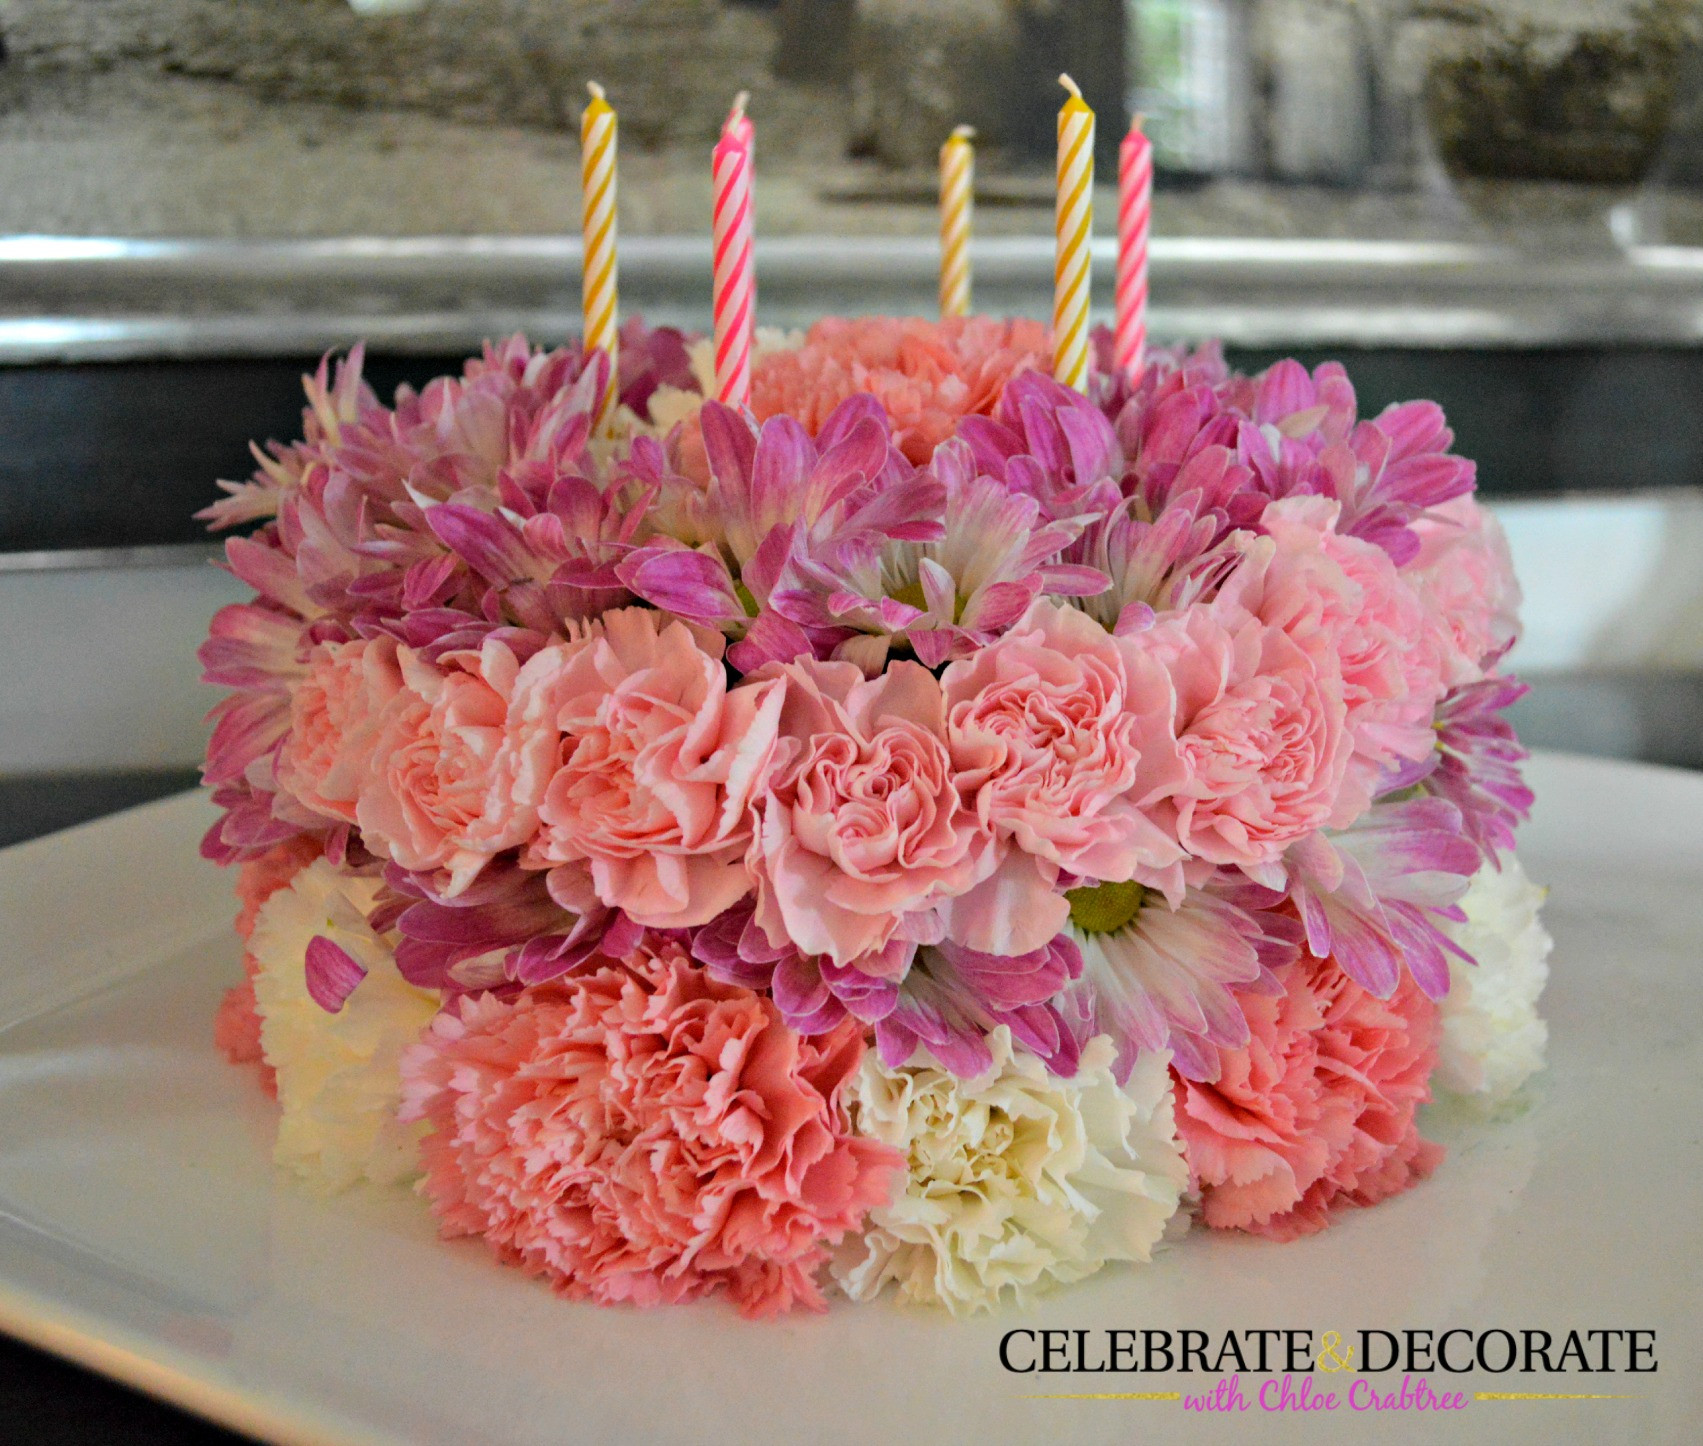 Floral Birthday Cake
 How to Make a Floral Birthday Cake Celebrate & Decorate